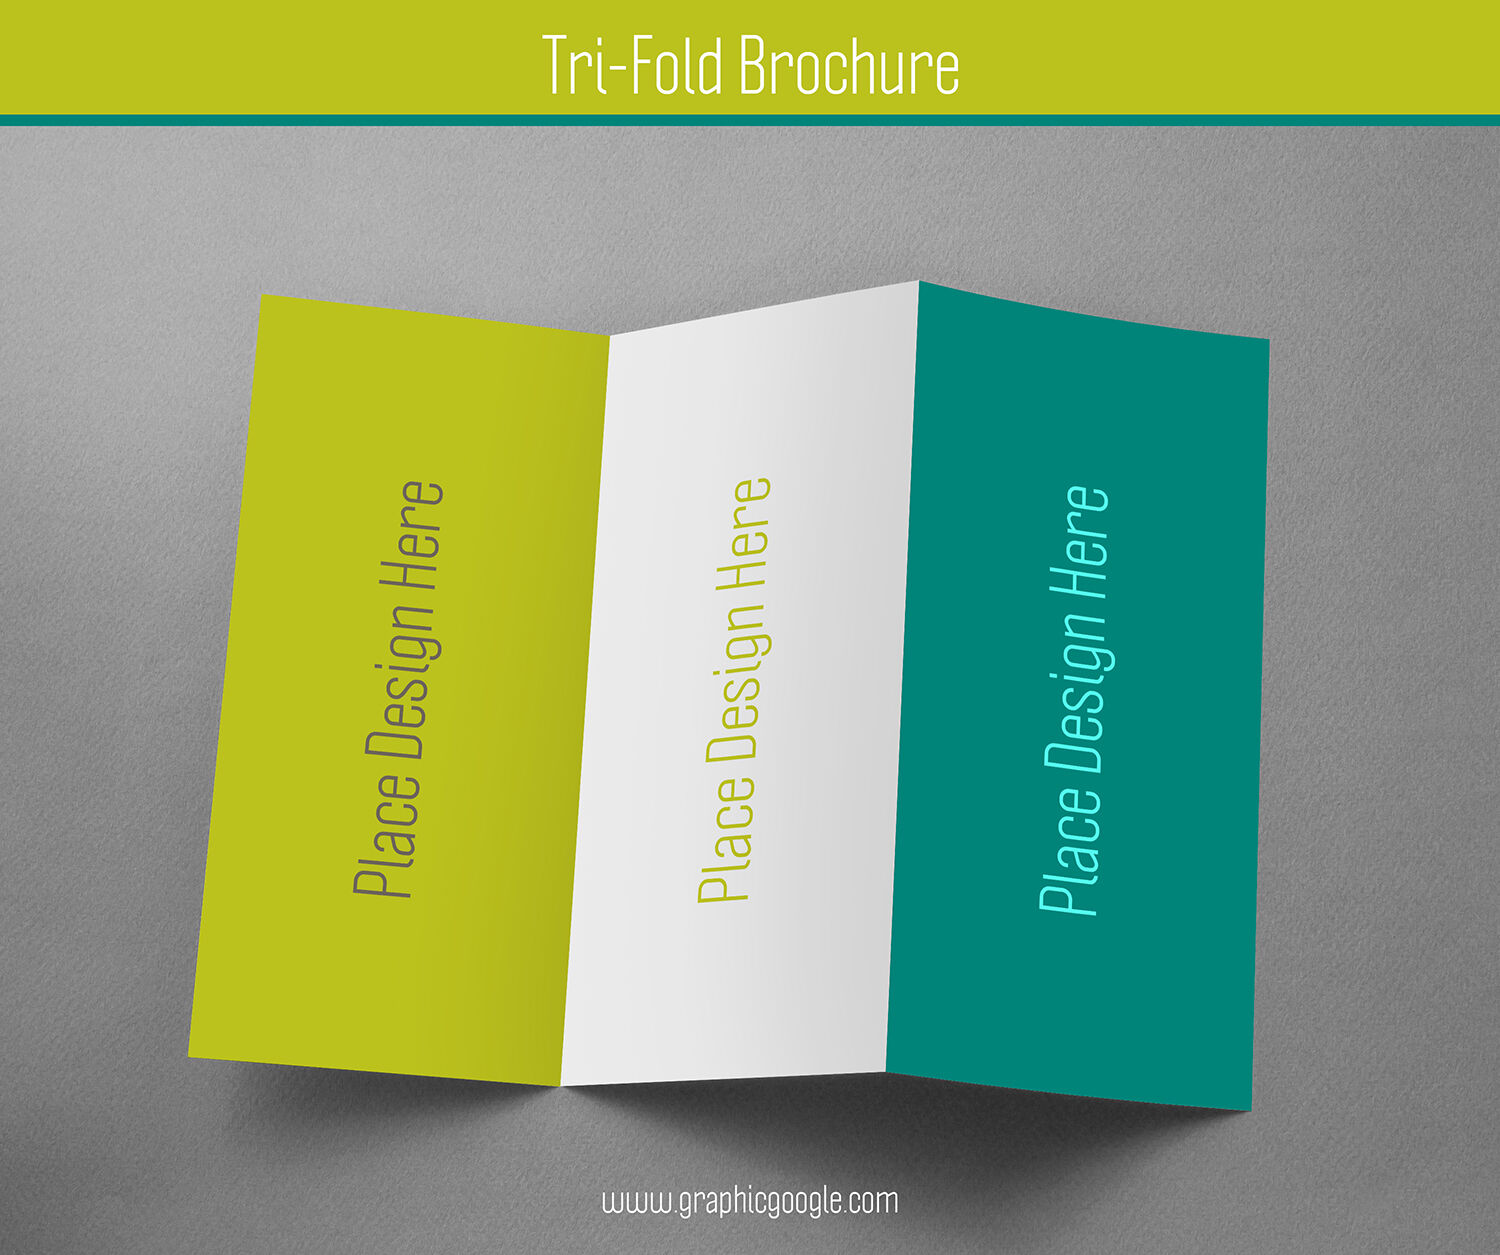 Mockup Displaying Realistic Tri-Fold Brochure for Graphic Designers FREE PSD